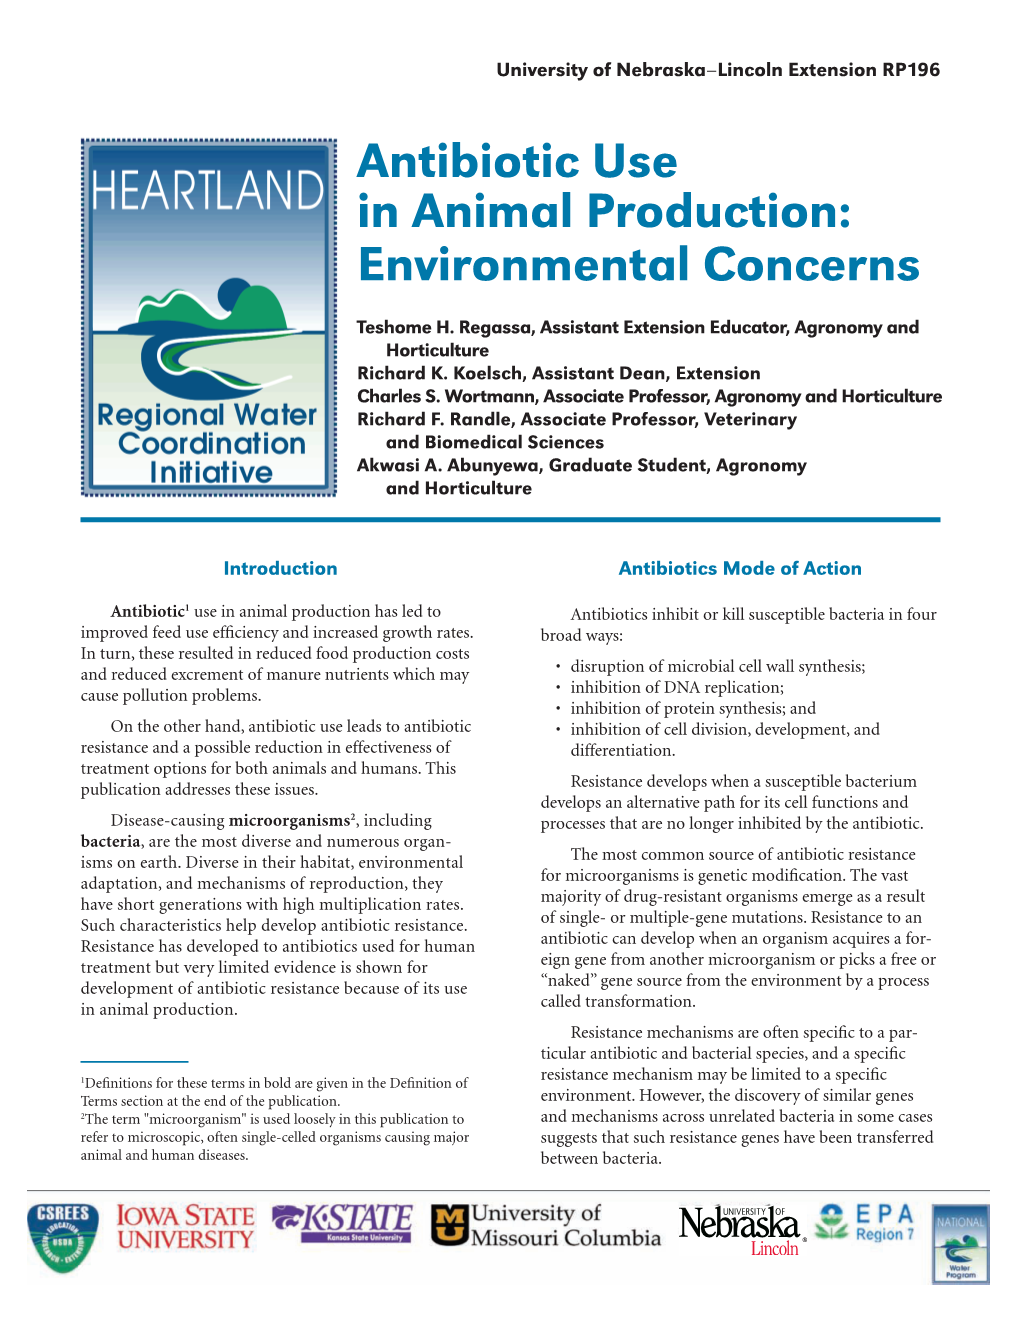 Antibiotic Use in Animal Production: Environmental Concerns